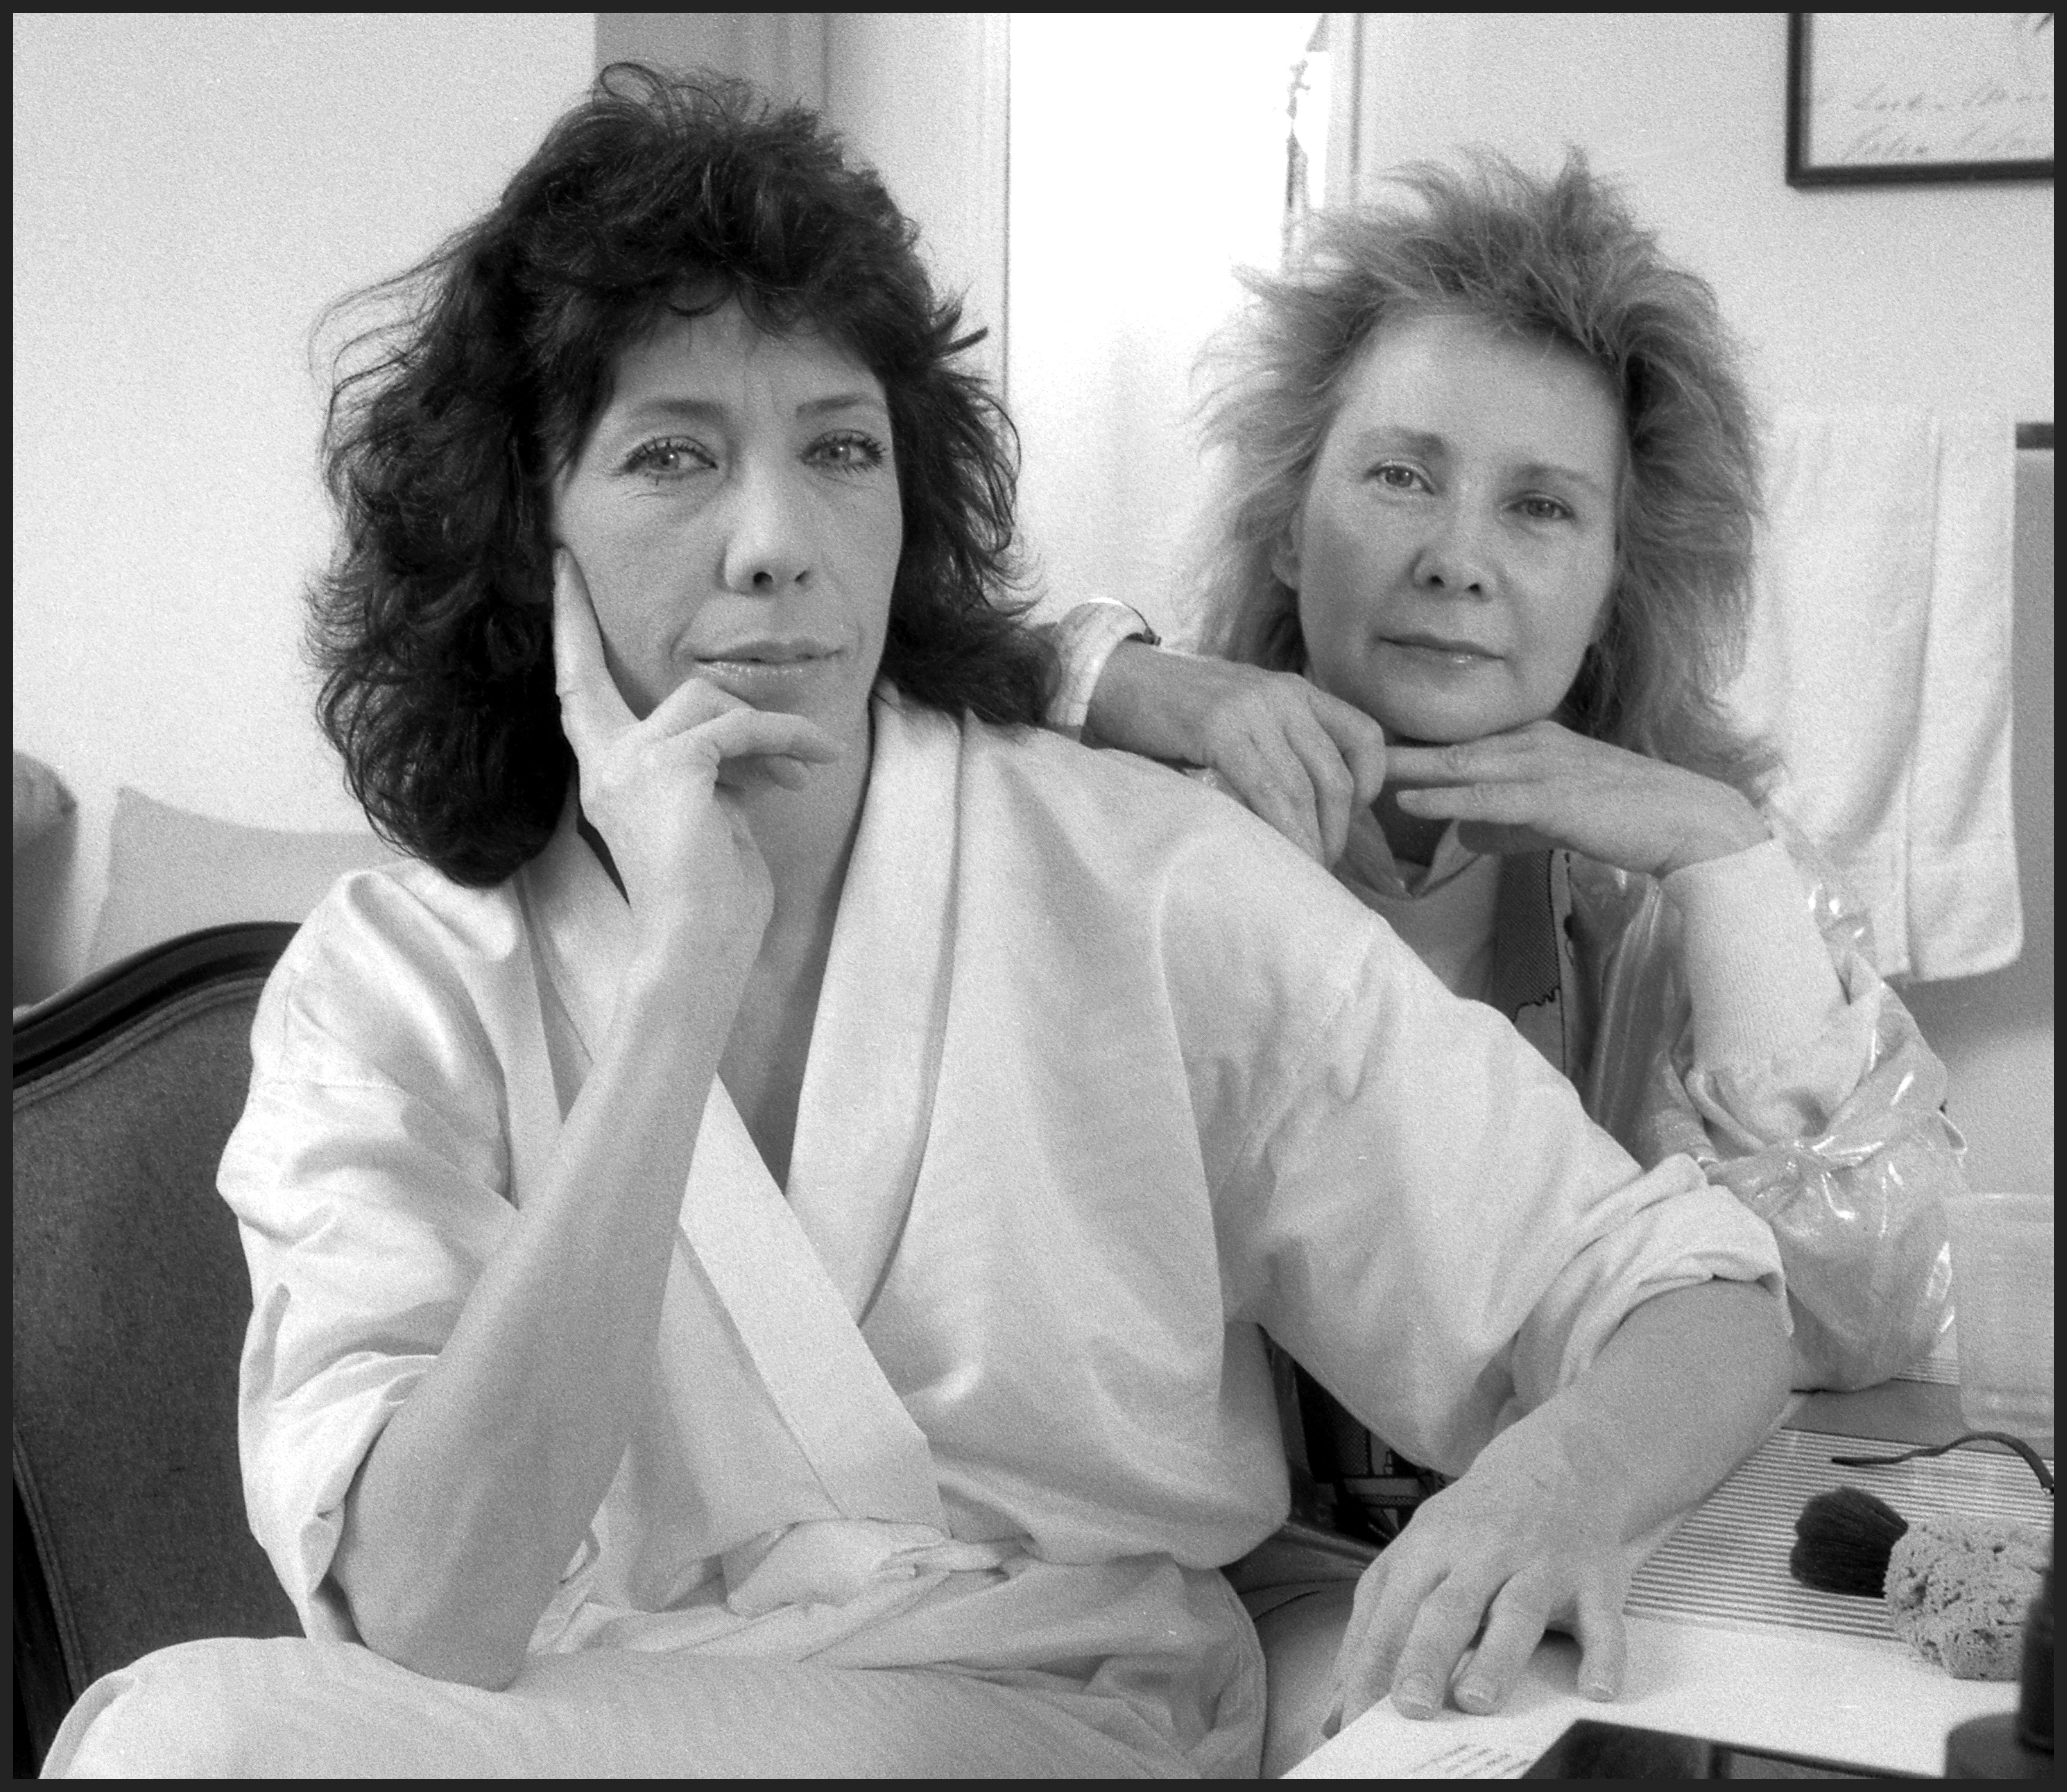 Closer Weekly: Lily Tomlin from 'Grace and Frankie' Says Her Lack of ...